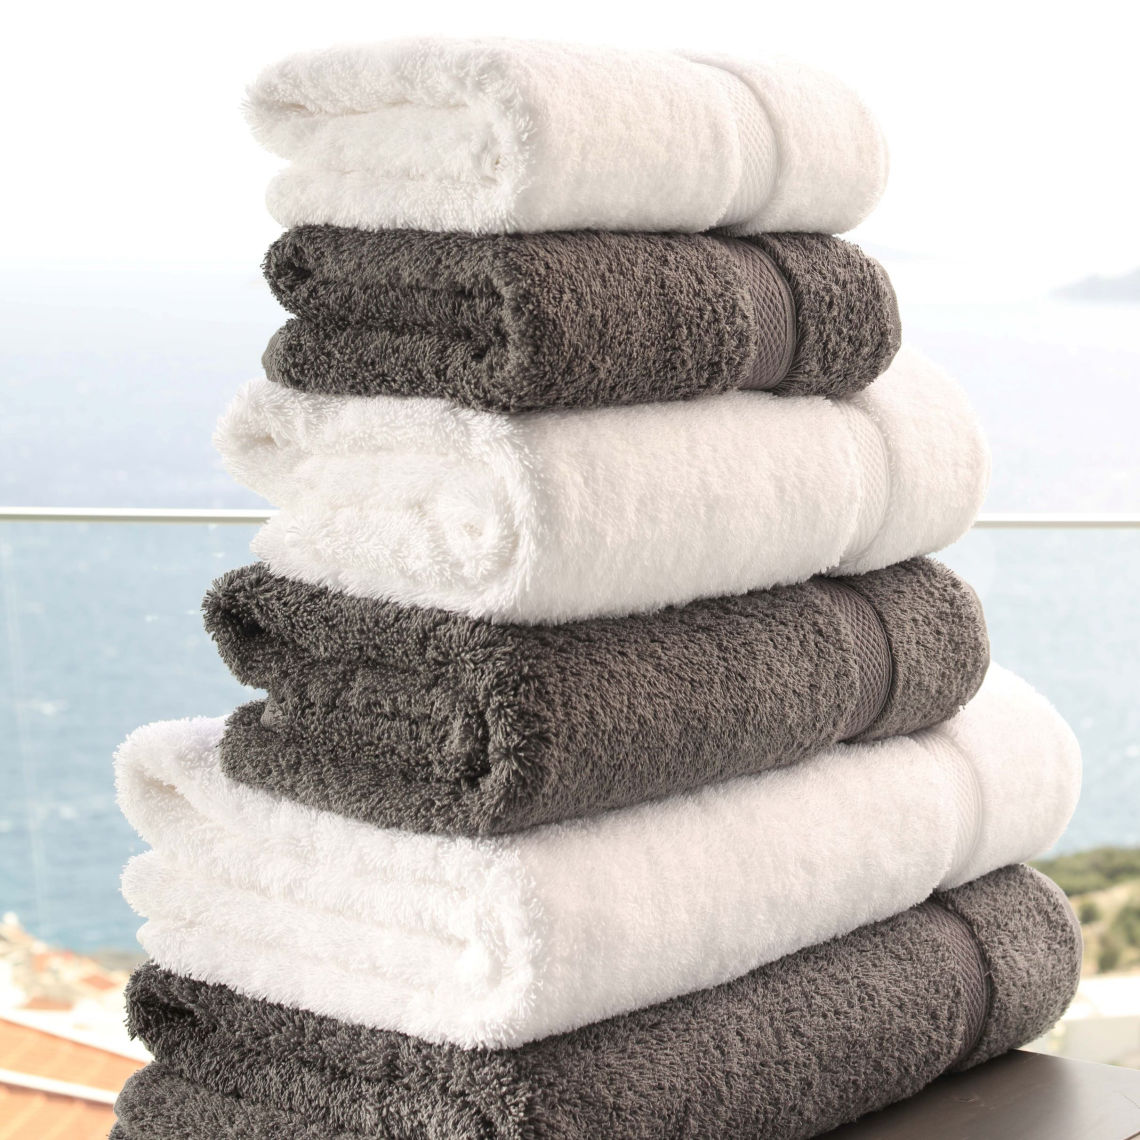 Spavision | BC Softwear - Spa Linens and Towelling